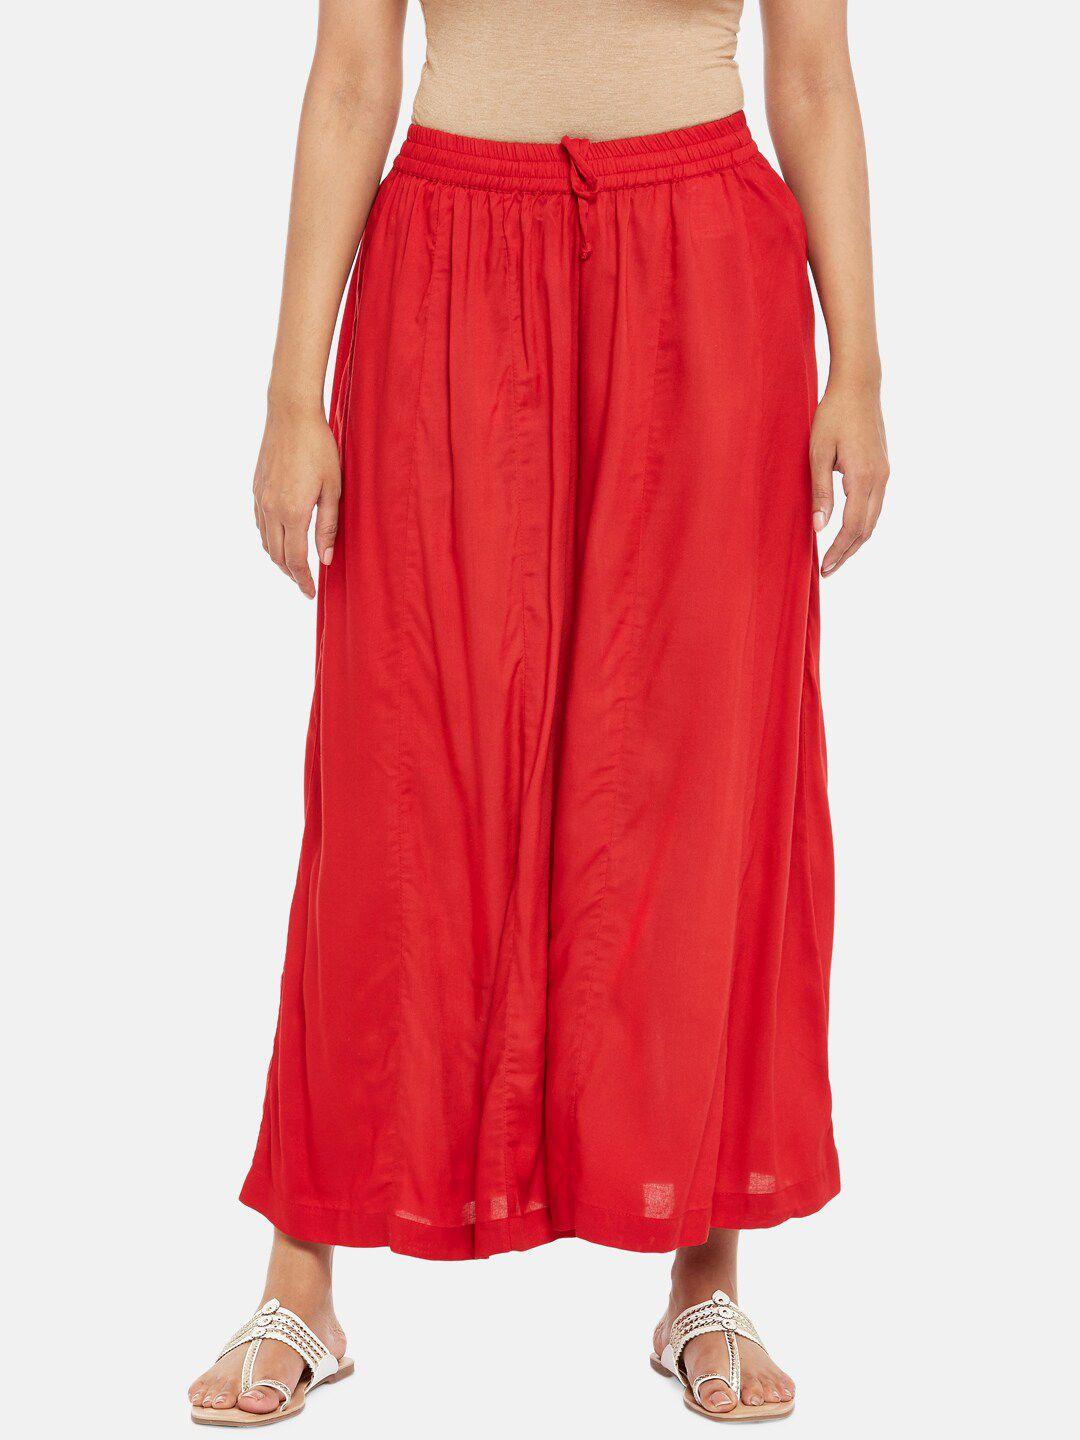 rangmanch by pantaloons women red flared ethnic palazzos